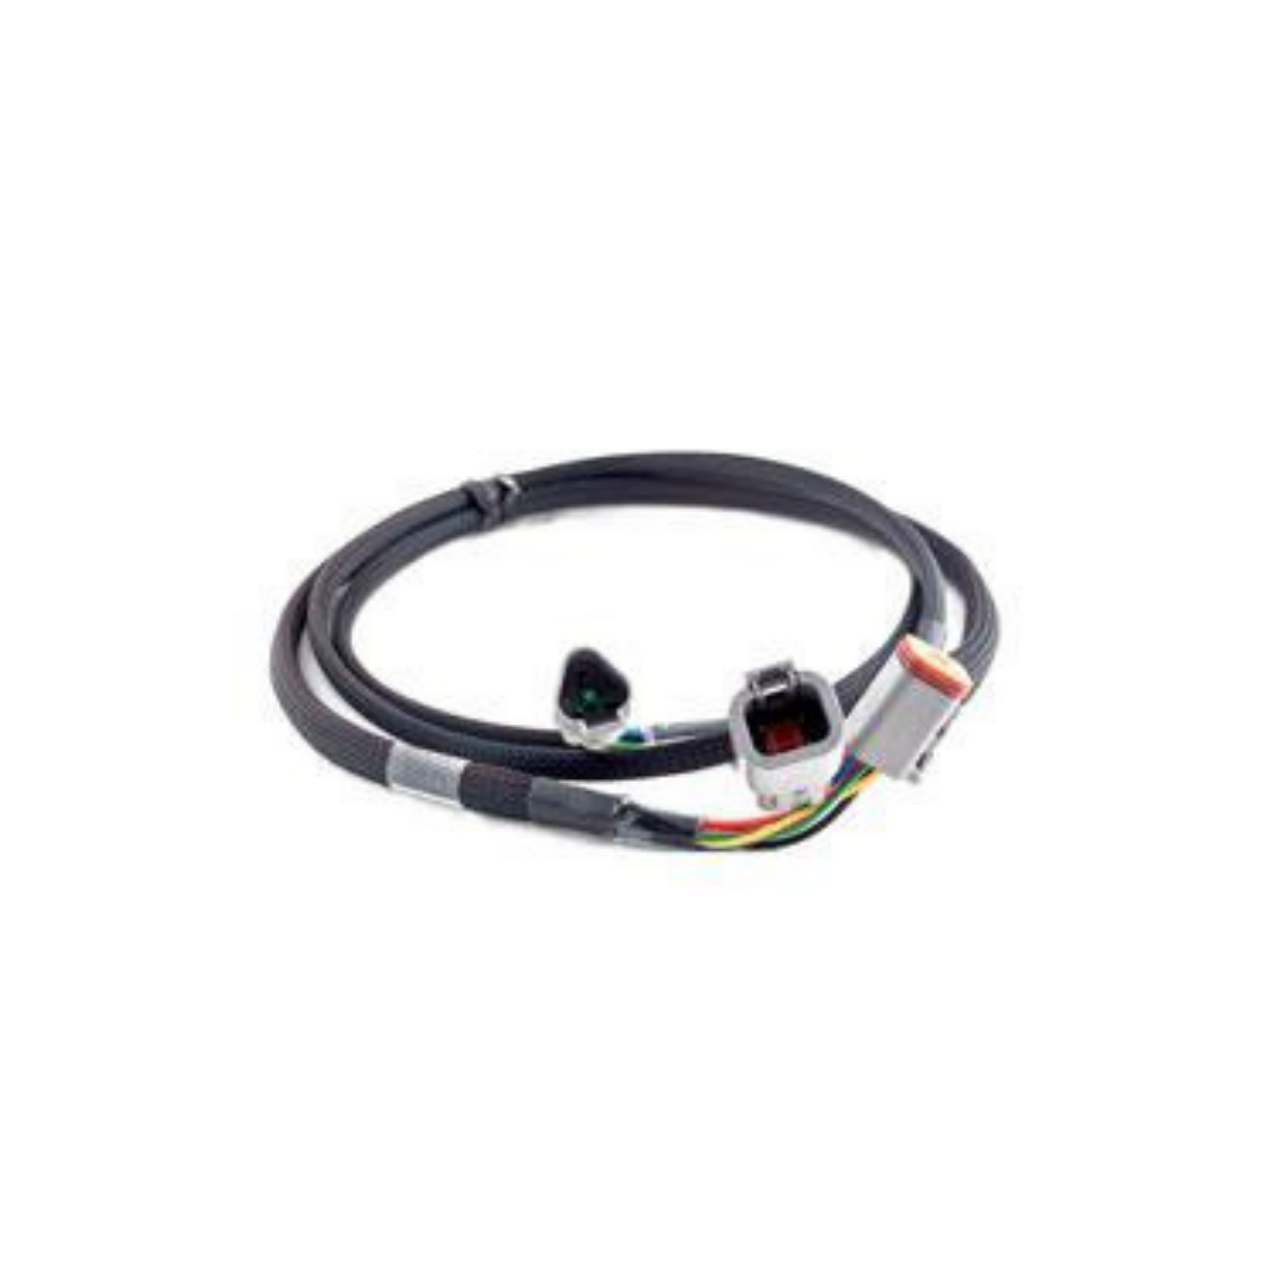 Power to Display Cable for GFX-350™/750™